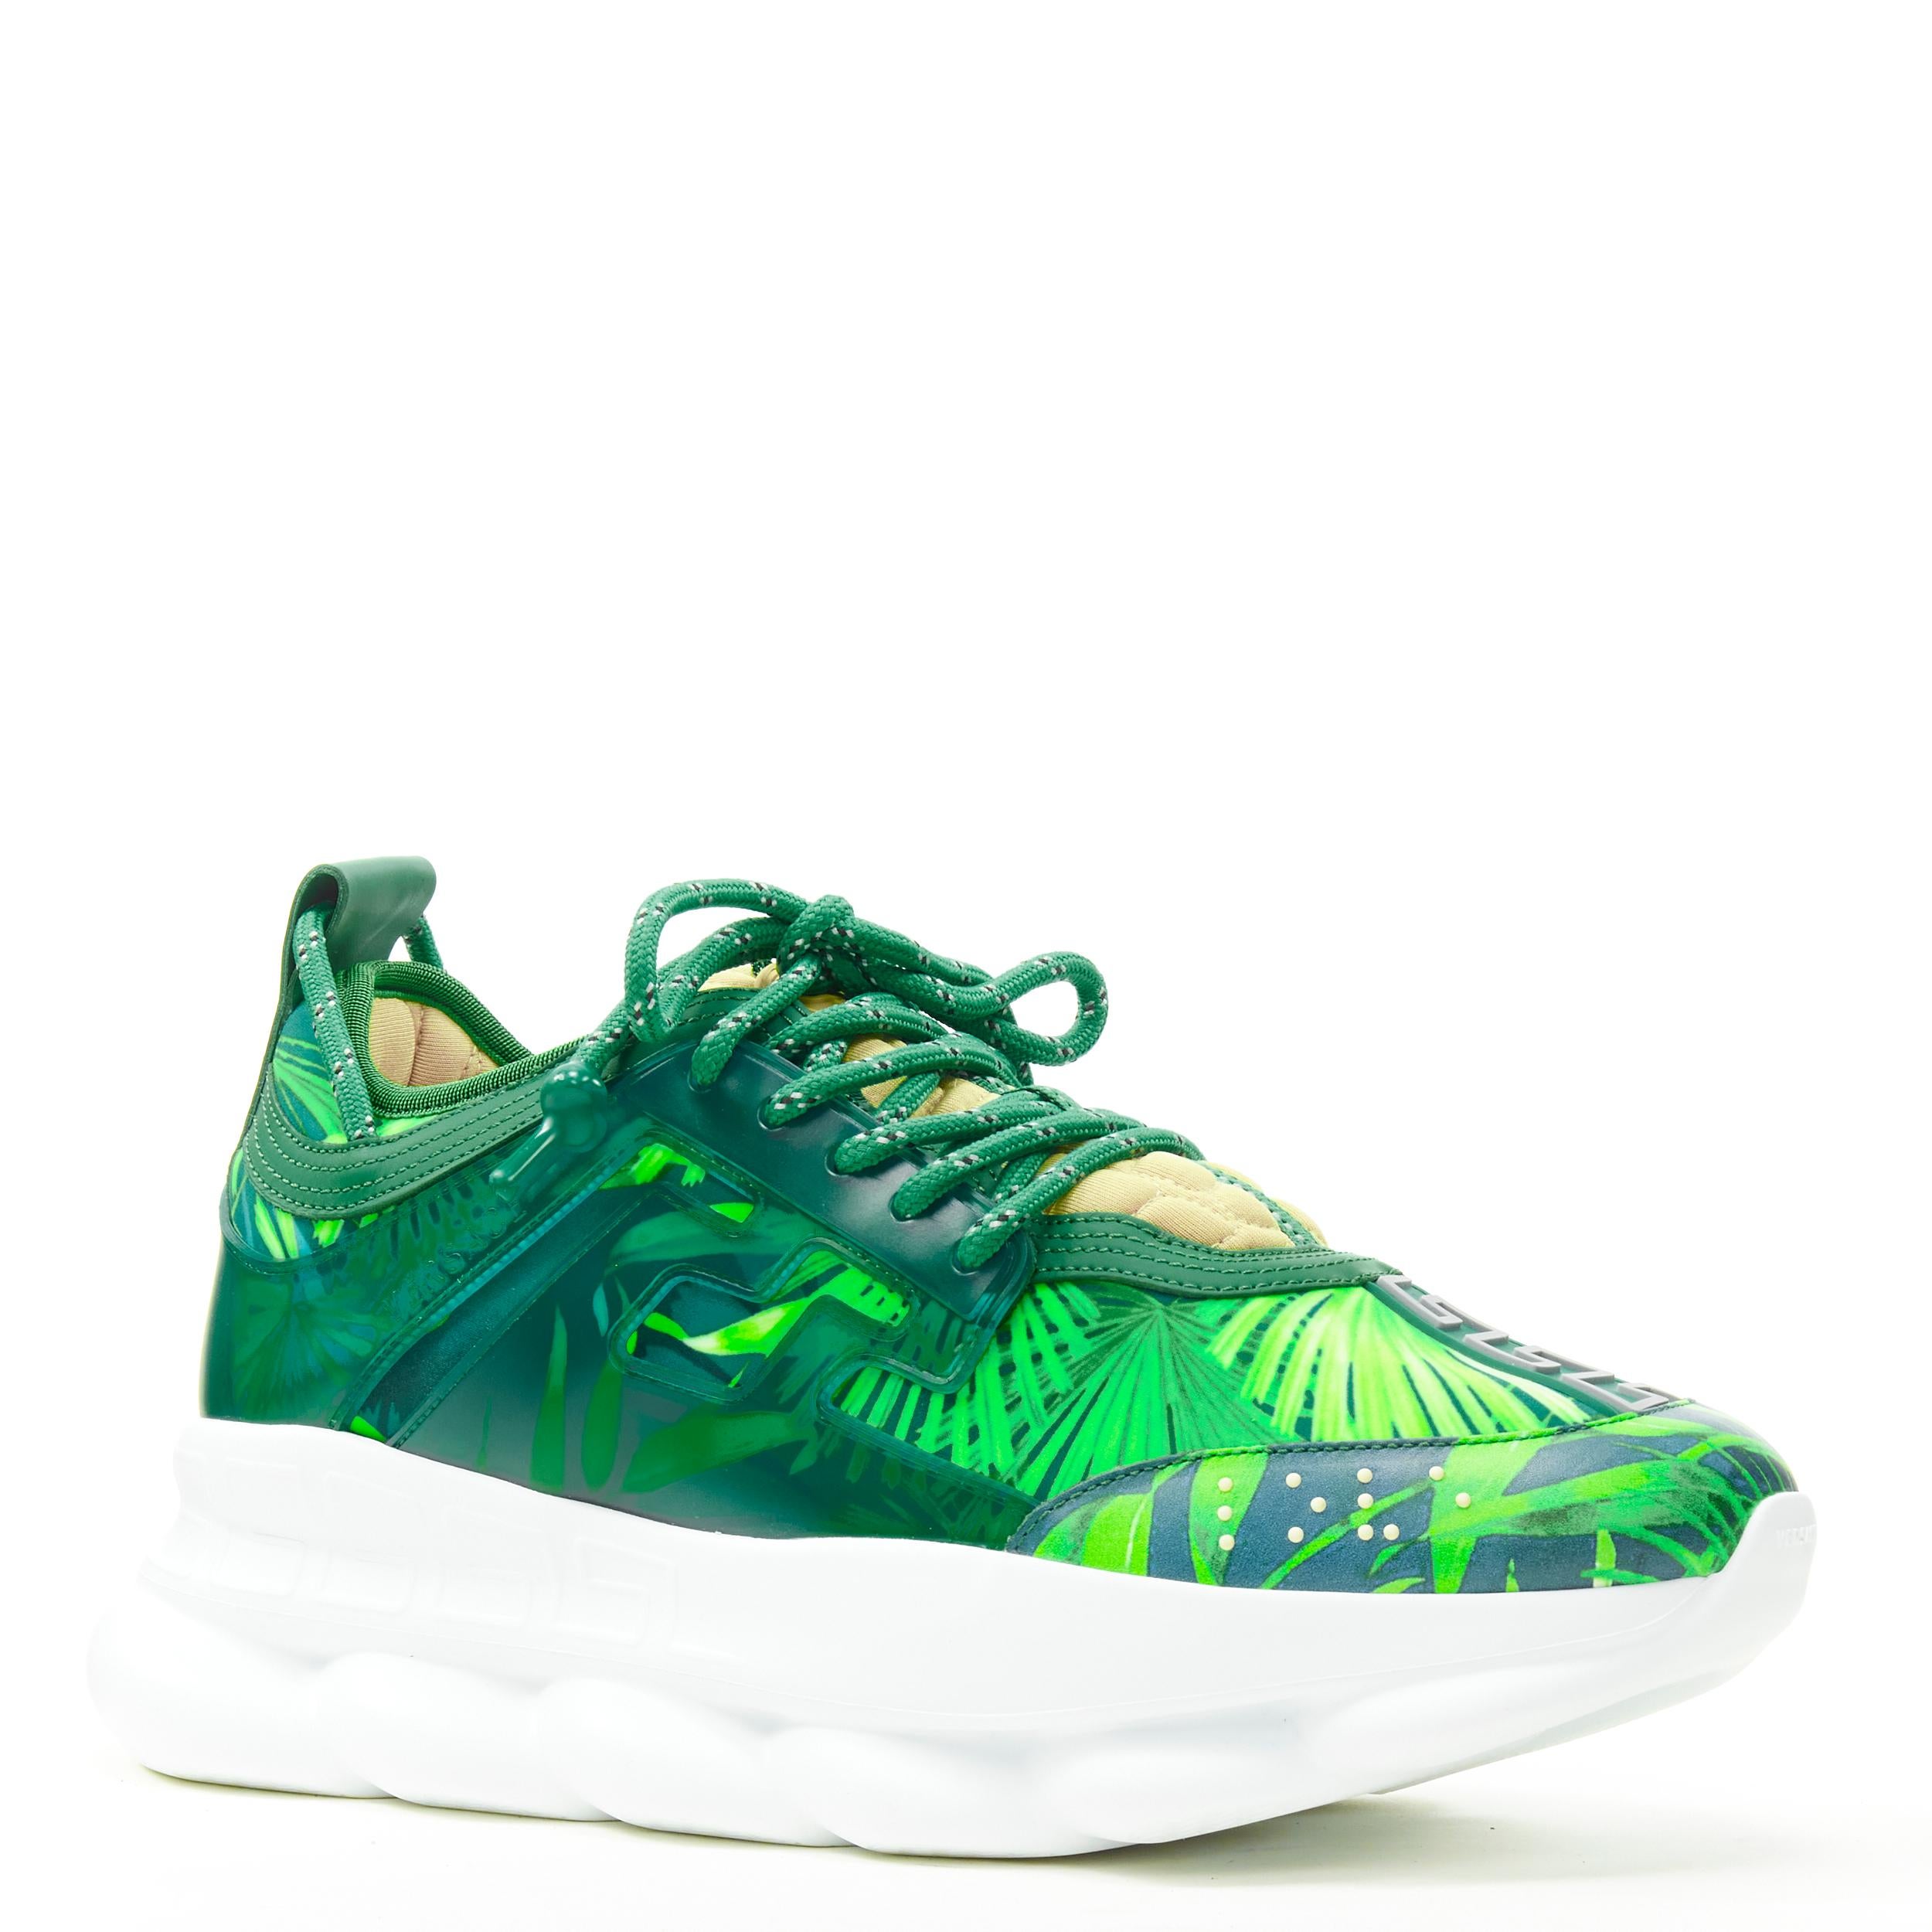 new VERSACE Chain Reaction Jungle Print green chunky sole sneaker EU43 rare 
Reference: TGAS/B02228 
Brand: Versace 
Designer: Donatella Versace 
Model: Chain Reaction 
Collection: Spring Summer 2020 Runway 
Material: Leather 
Color: Green 
Pattern: